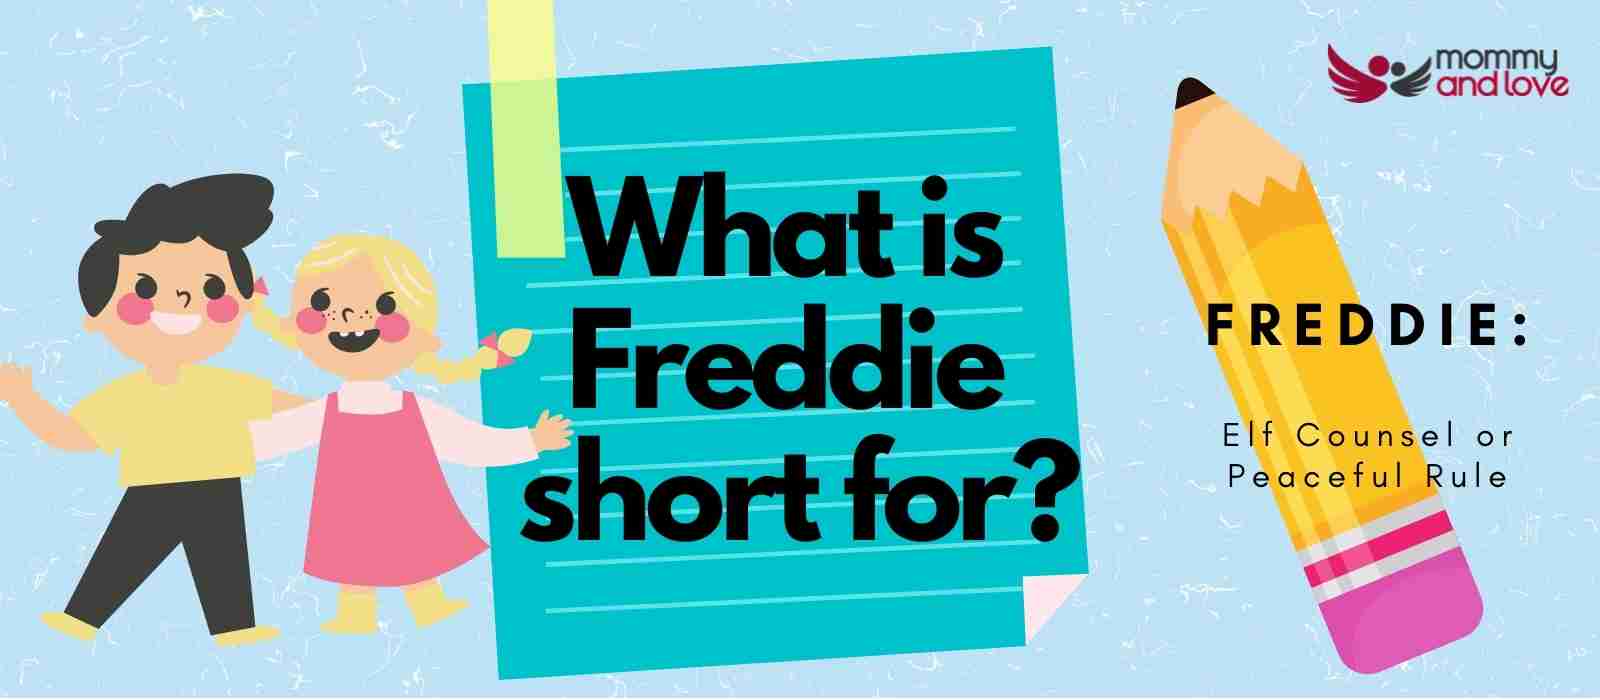 What is Freddie short for